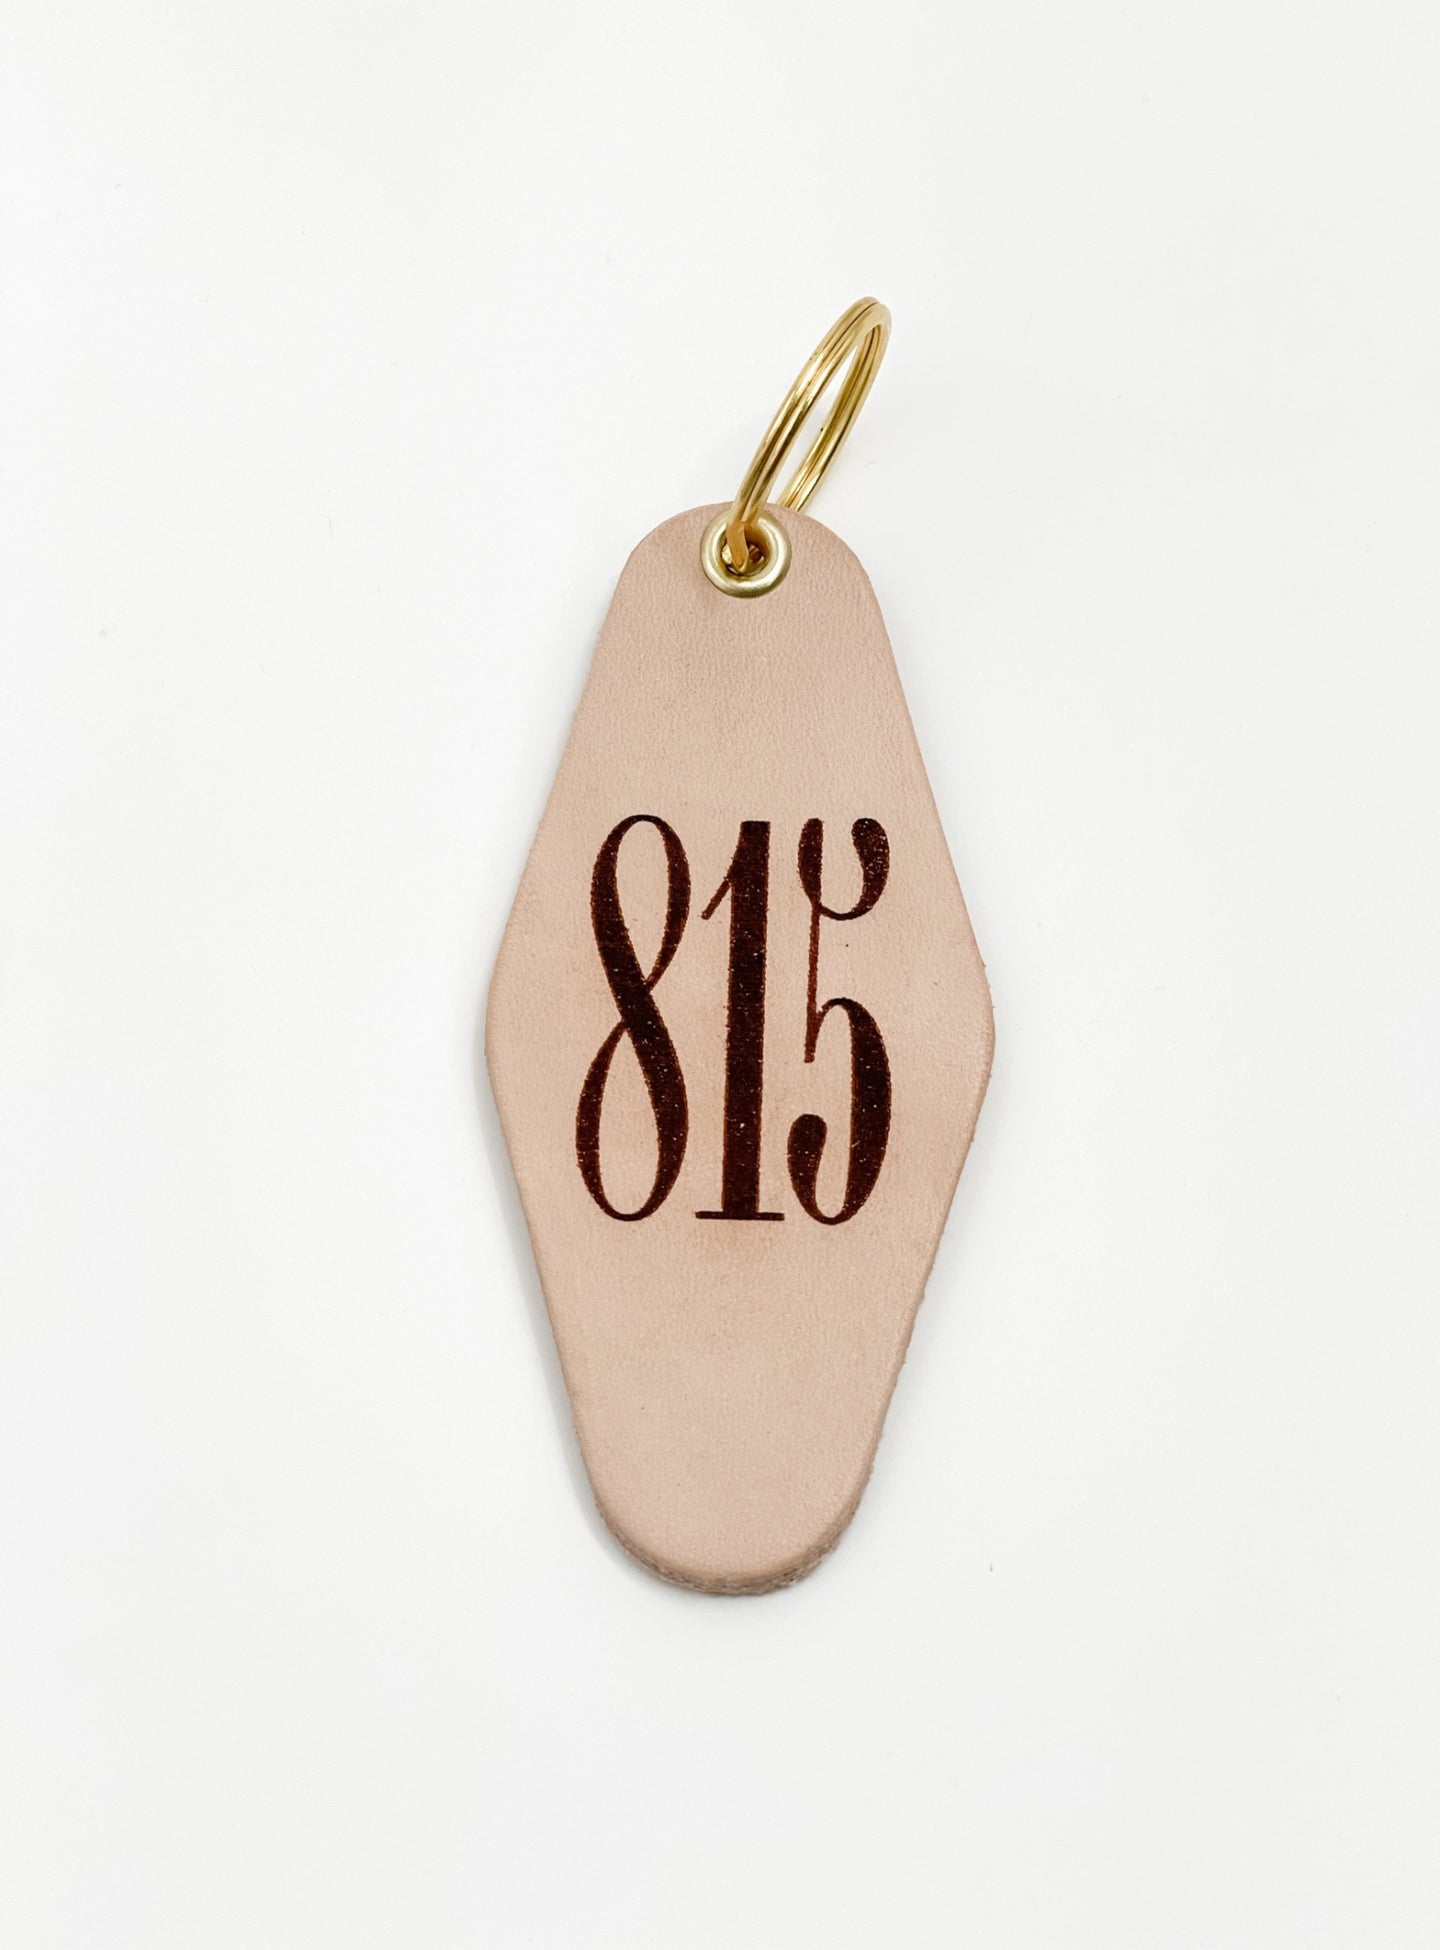 photo of leather motel style keychain with 815 markings on the face of the keychain and gold hardware